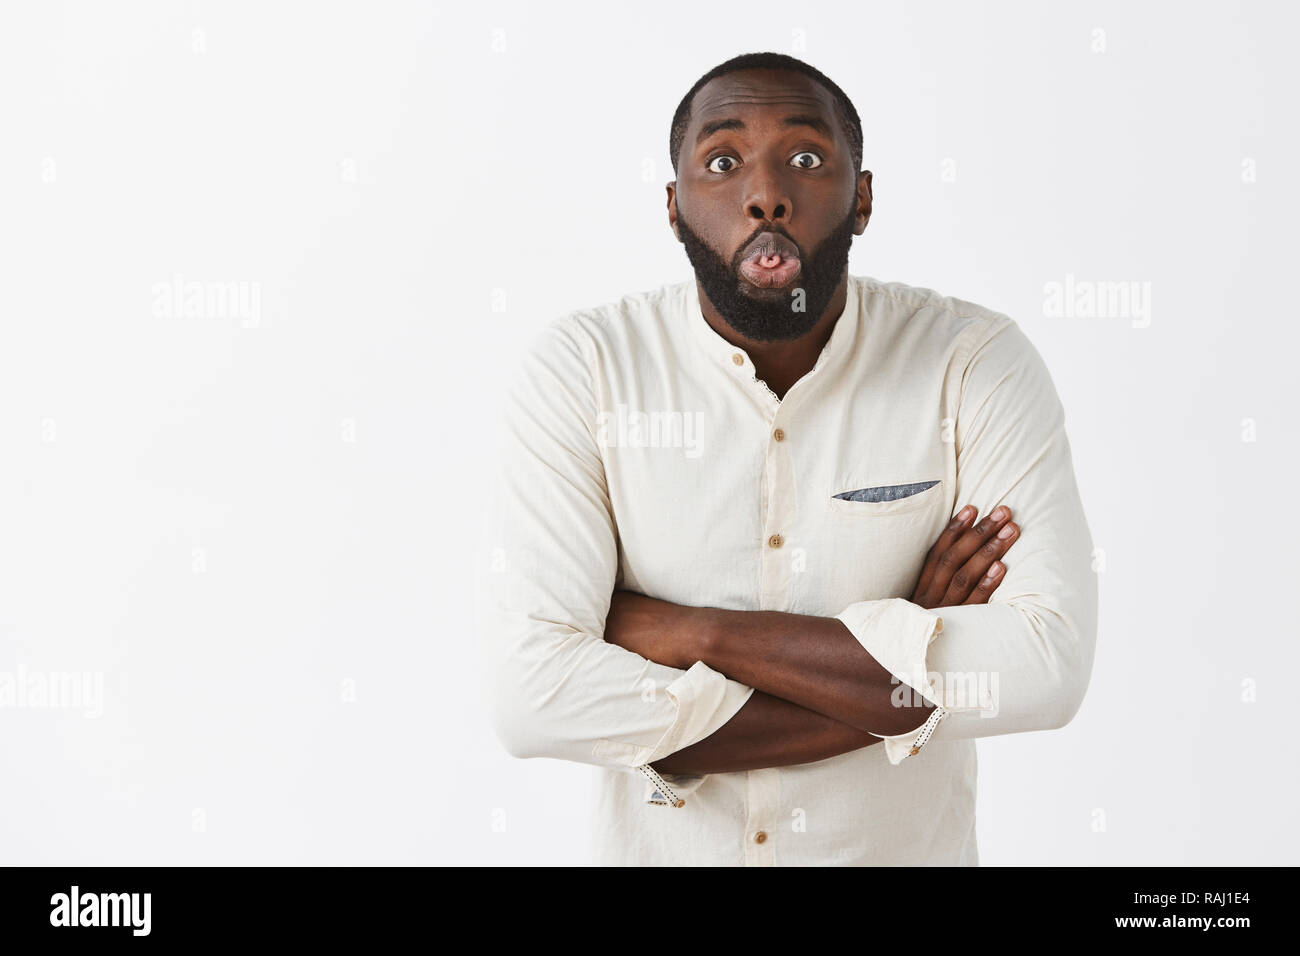 Indoor shot of cute and funny African American male in white trendy shirt mocking girlfriend, rolling and showing tongue, holding hands crossed, being childish and joyful over gray background Stock Photo